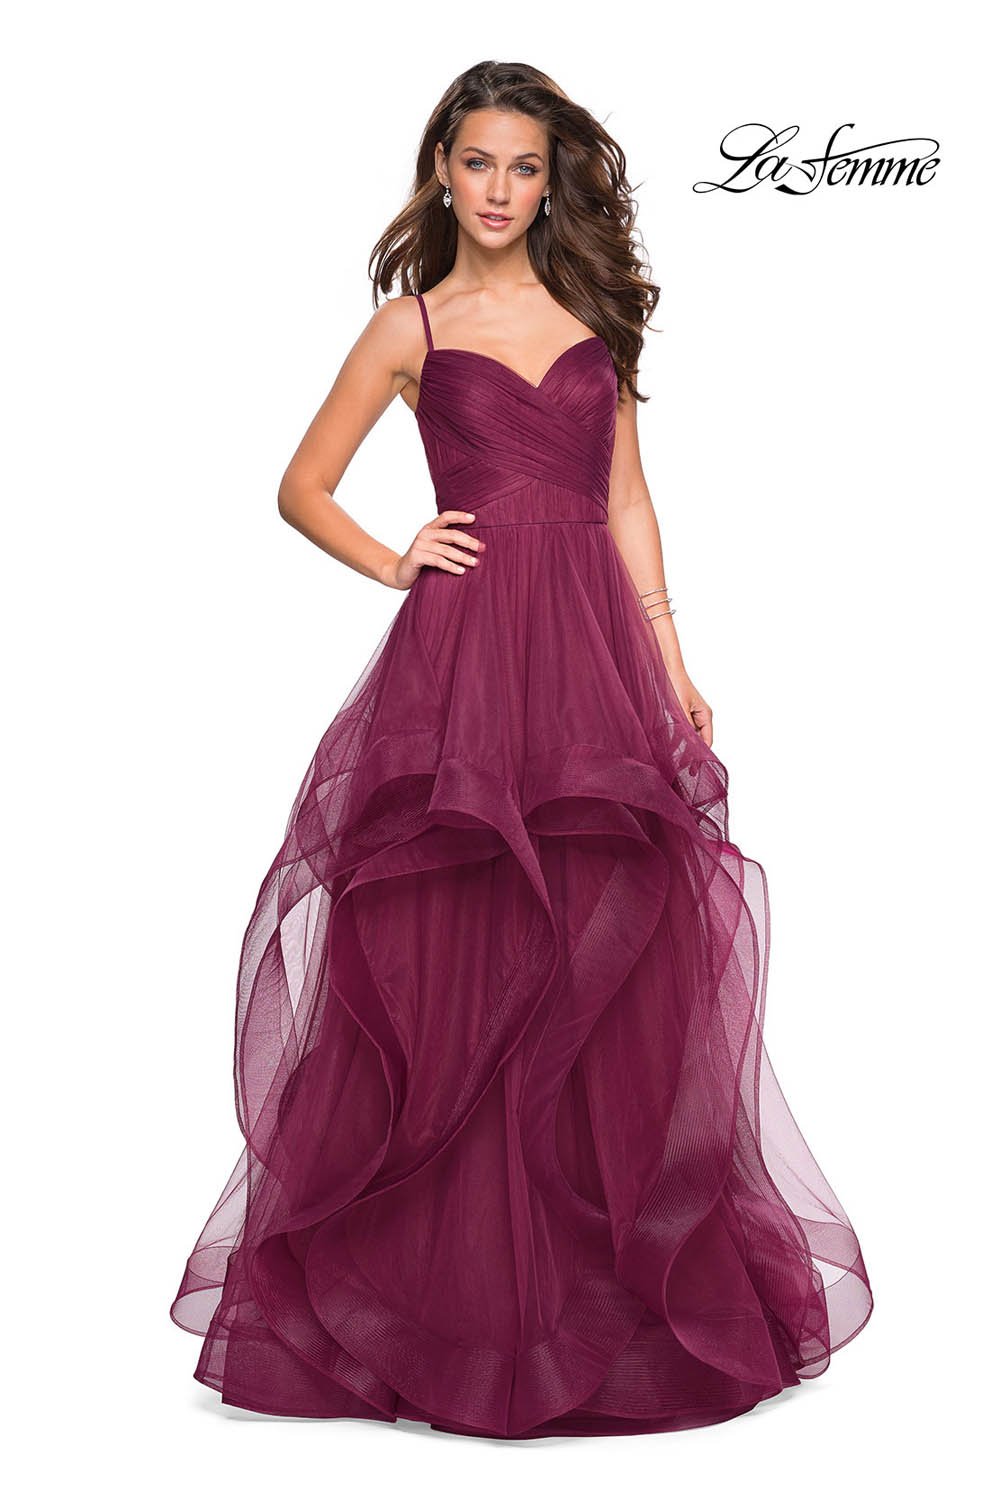 La Femme 27223 dress images in these colors: Blush, Dark Berry, Navy.